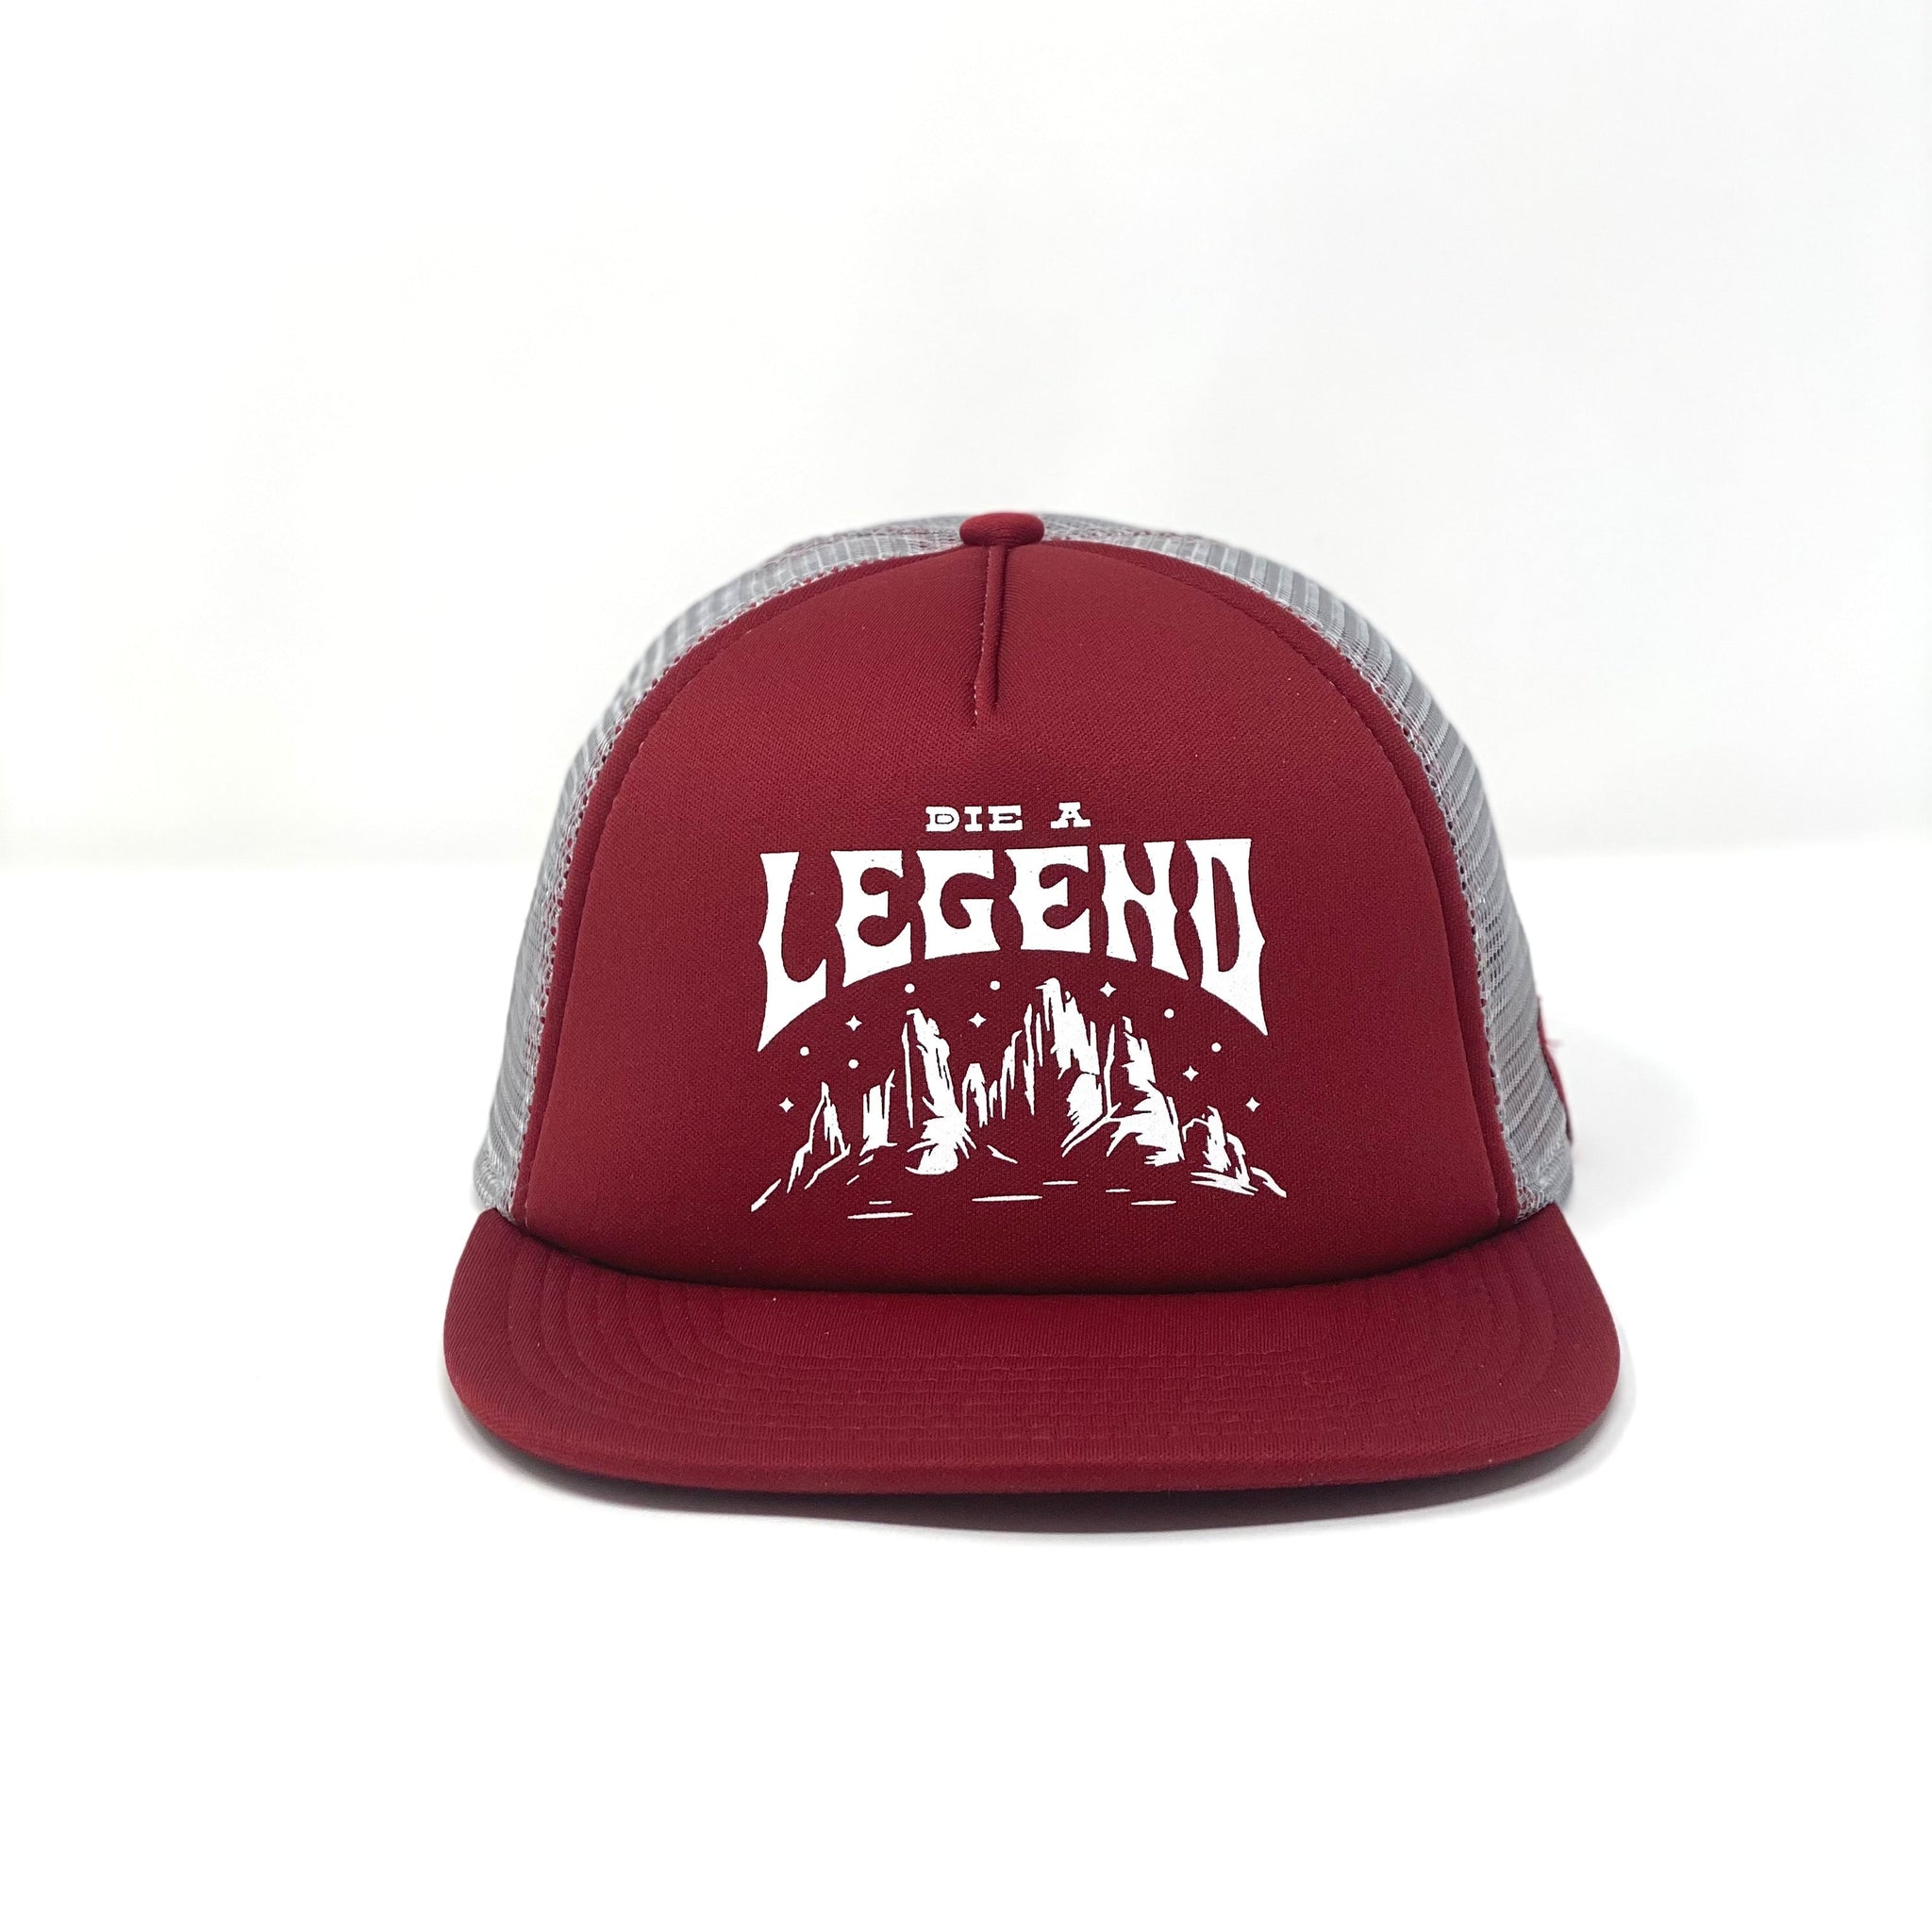 The Die a Legend Hat